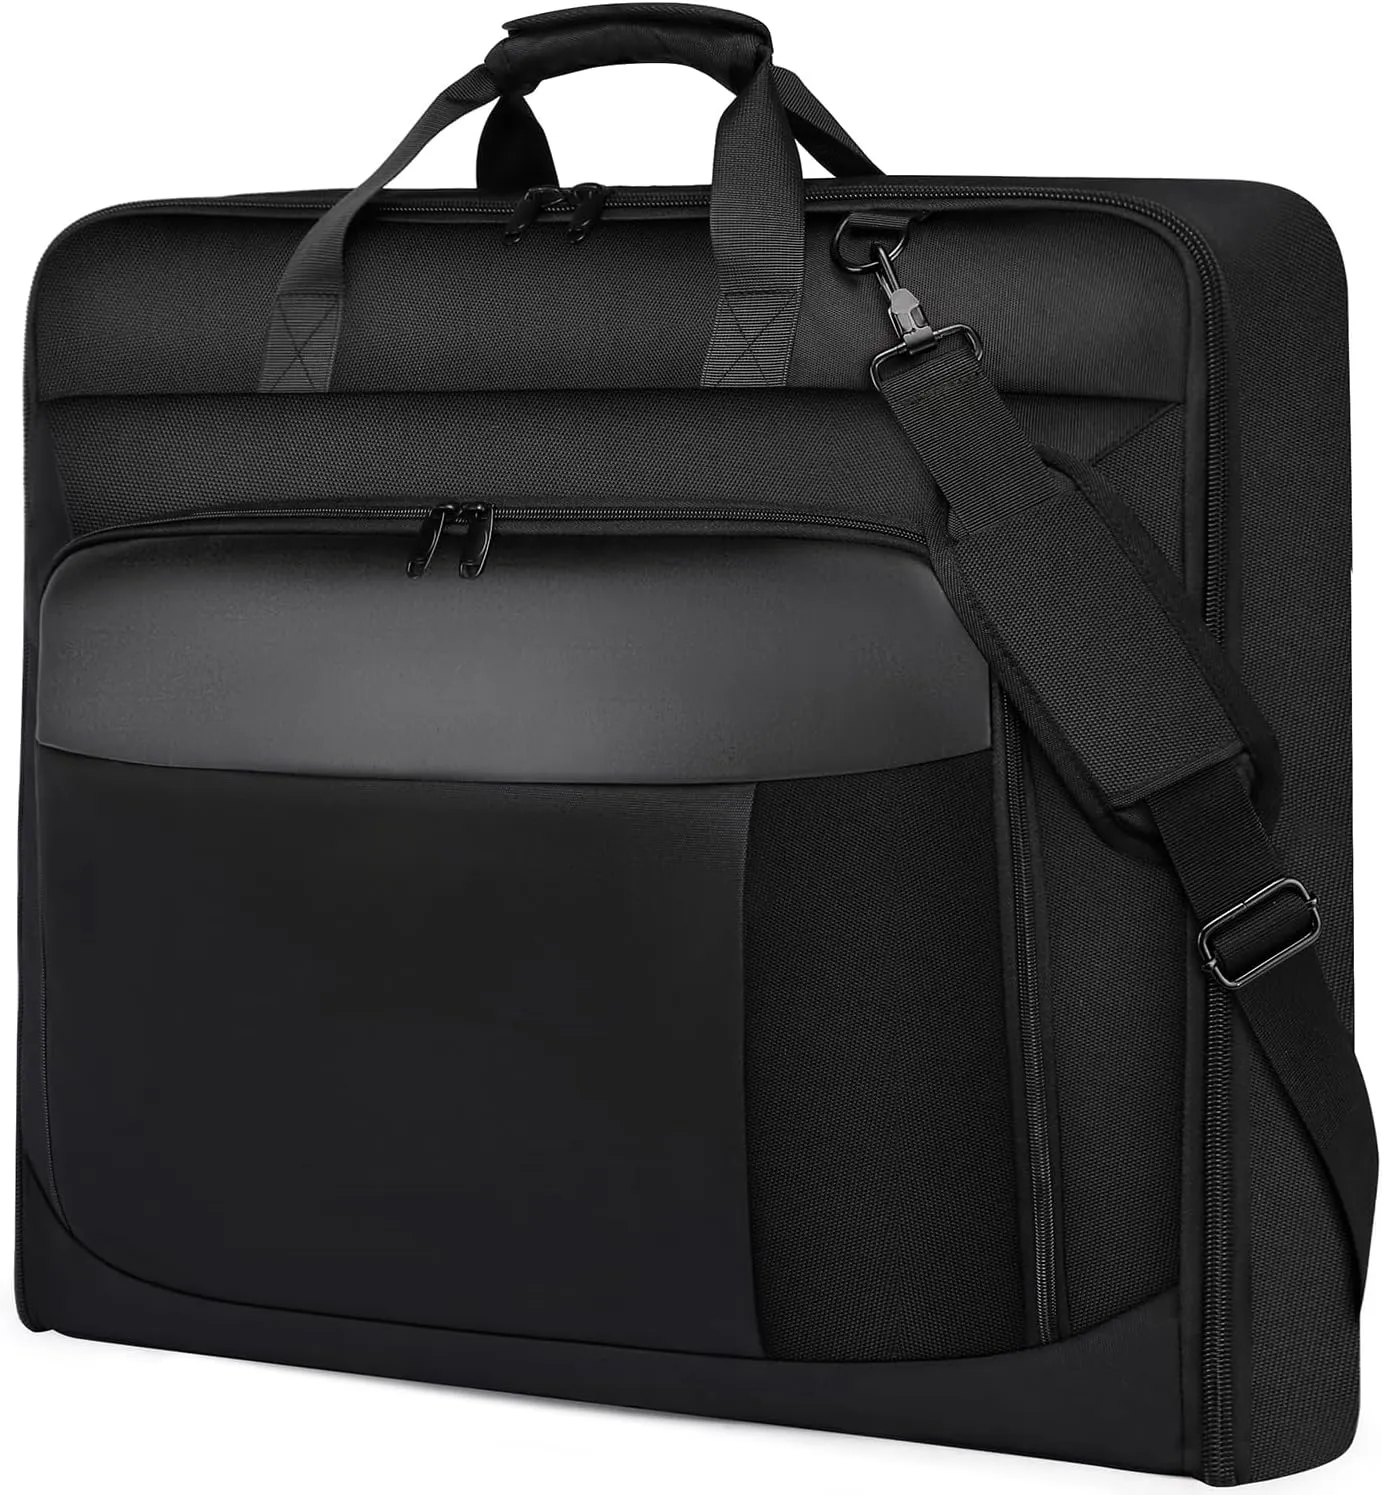 Travel Suit Bag for Men Large 40-Inch Carry on Garment Bag Up to 3 Suits for Business Trips